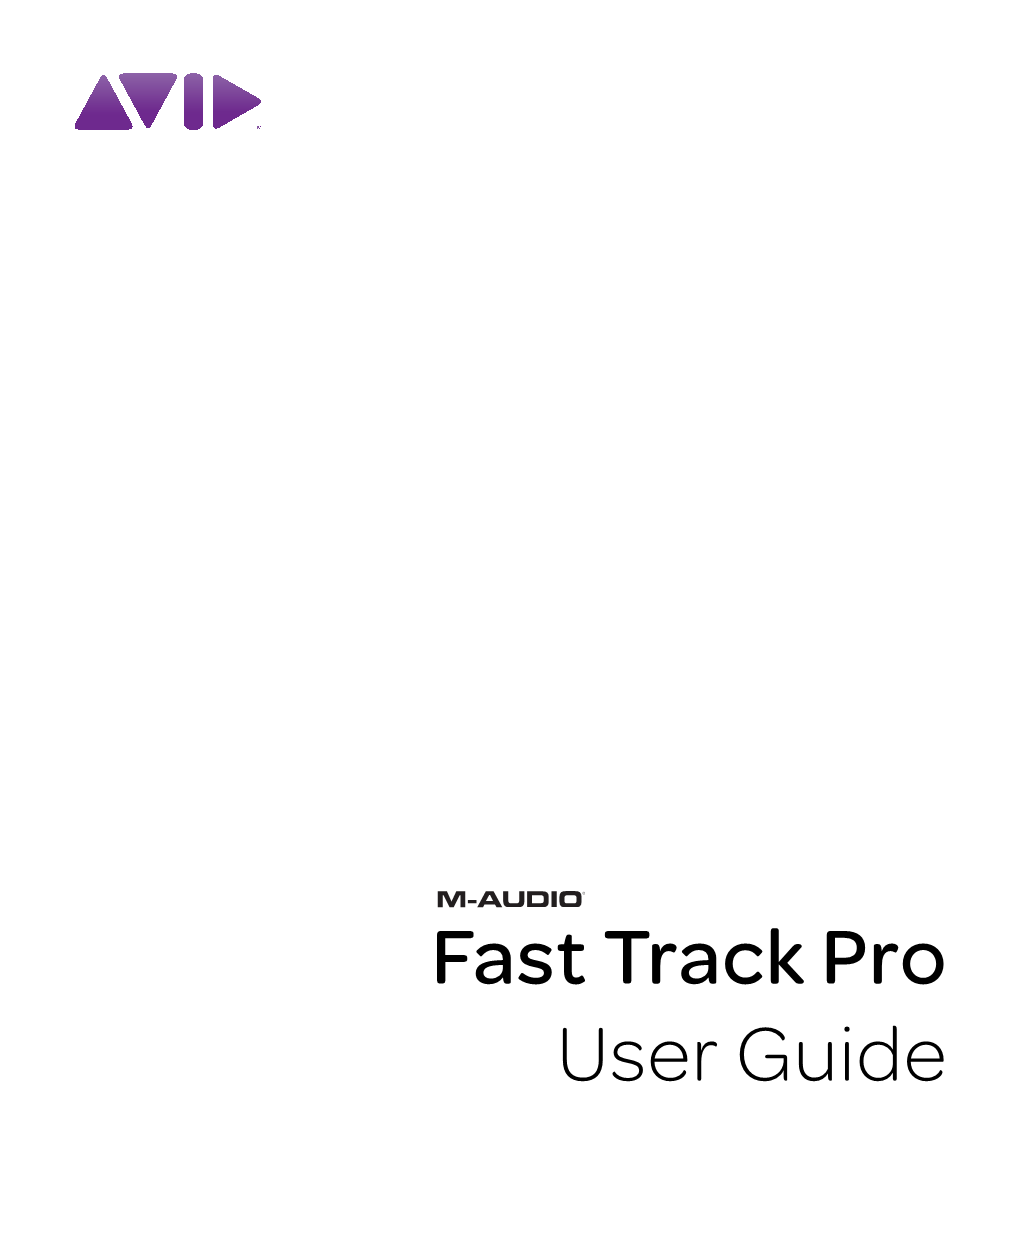 Fast Track Pro User Guide Legal Notices This Guide Is Copyrighted ©2010 by Avid Technology, Inc., with All Rights Reserved